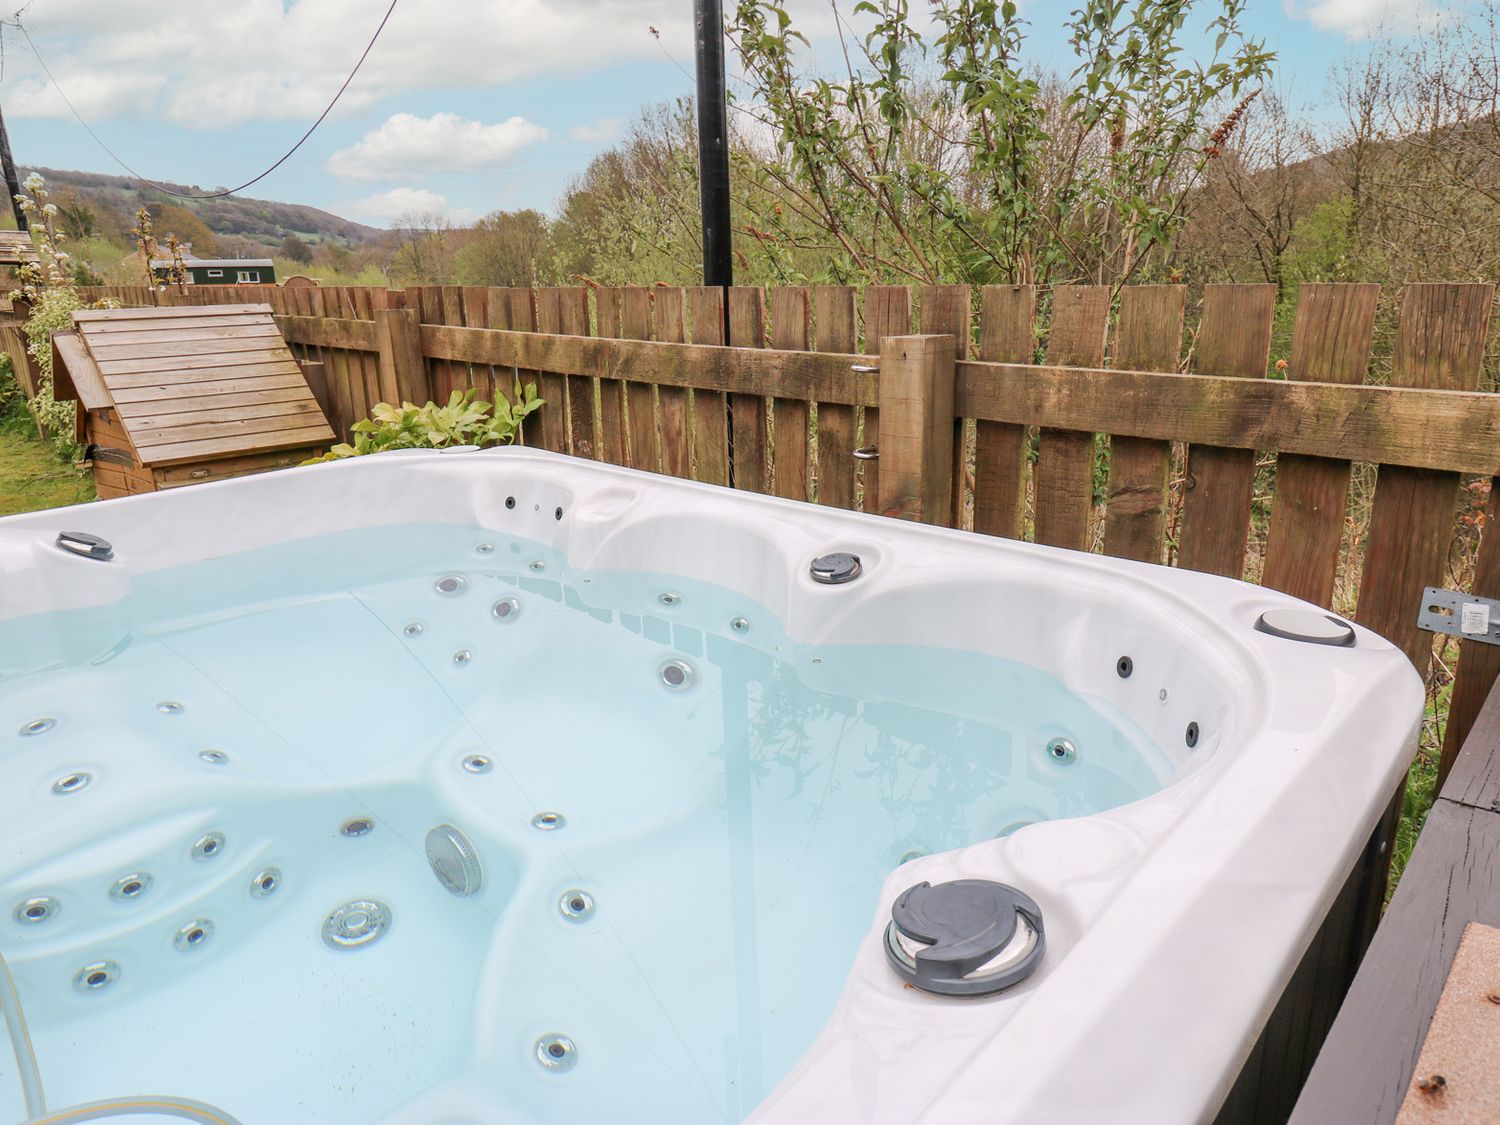 4 Pheasant Lane, is near Stocksbridge, South Yorkshire. Three-bedroom home, with hot tub and garden.